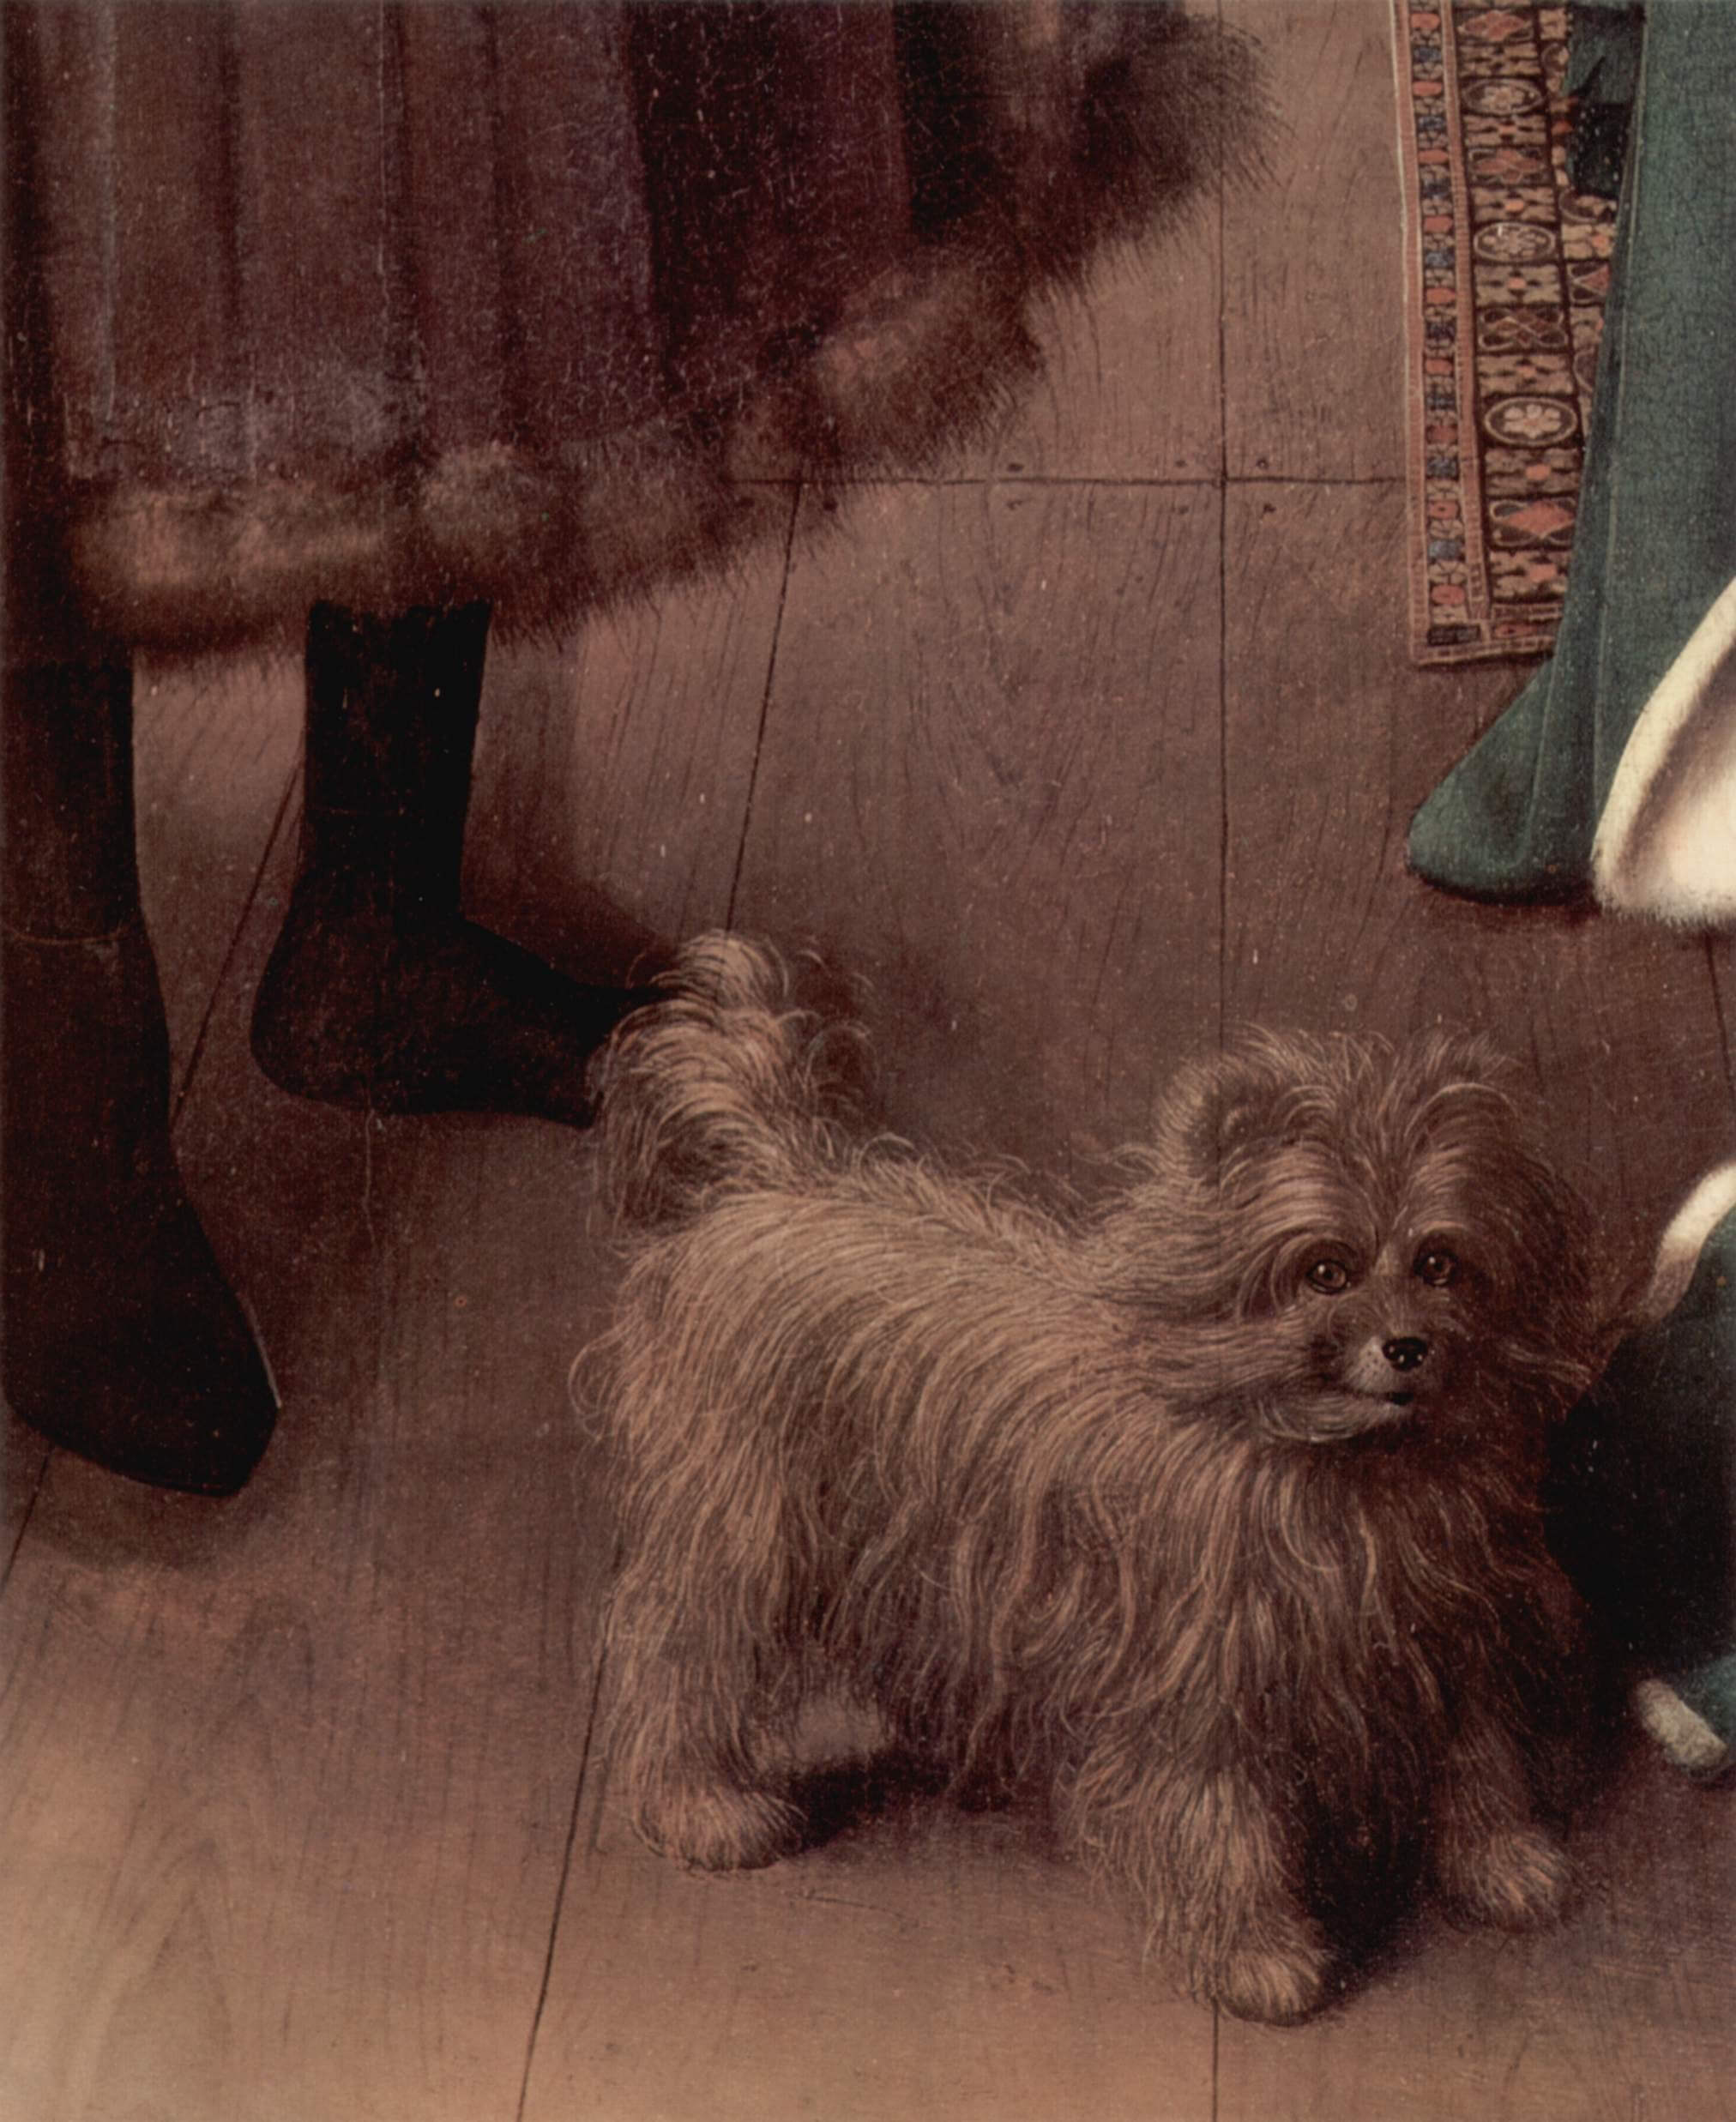 A small gray dog painted by Jan van Eyck